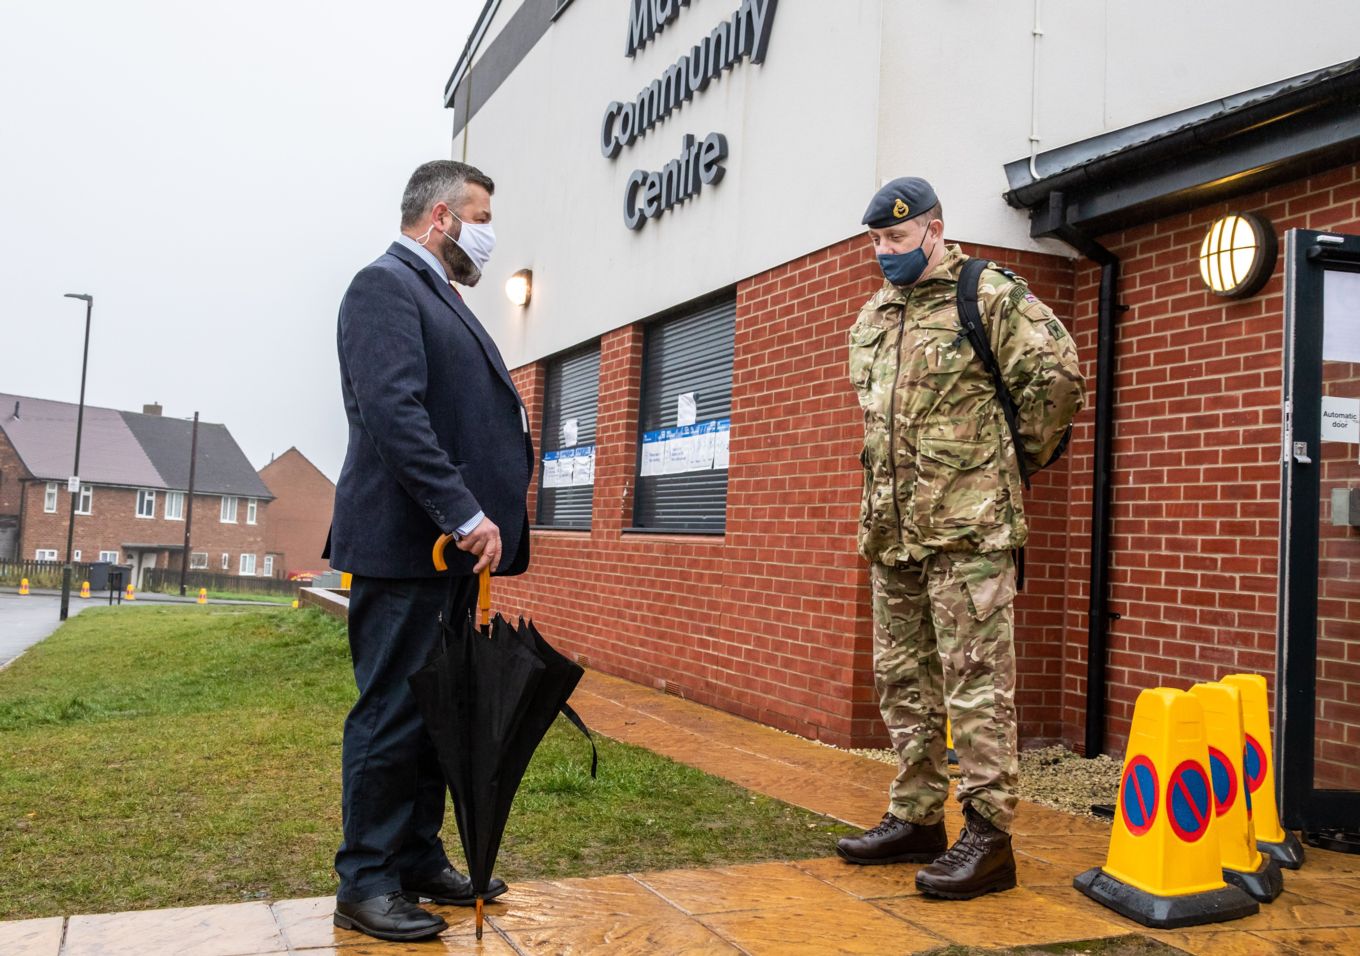 Air Commodore Miller meets a member of South Derbyshire Council outside Midway Community Centre in Swadlincote